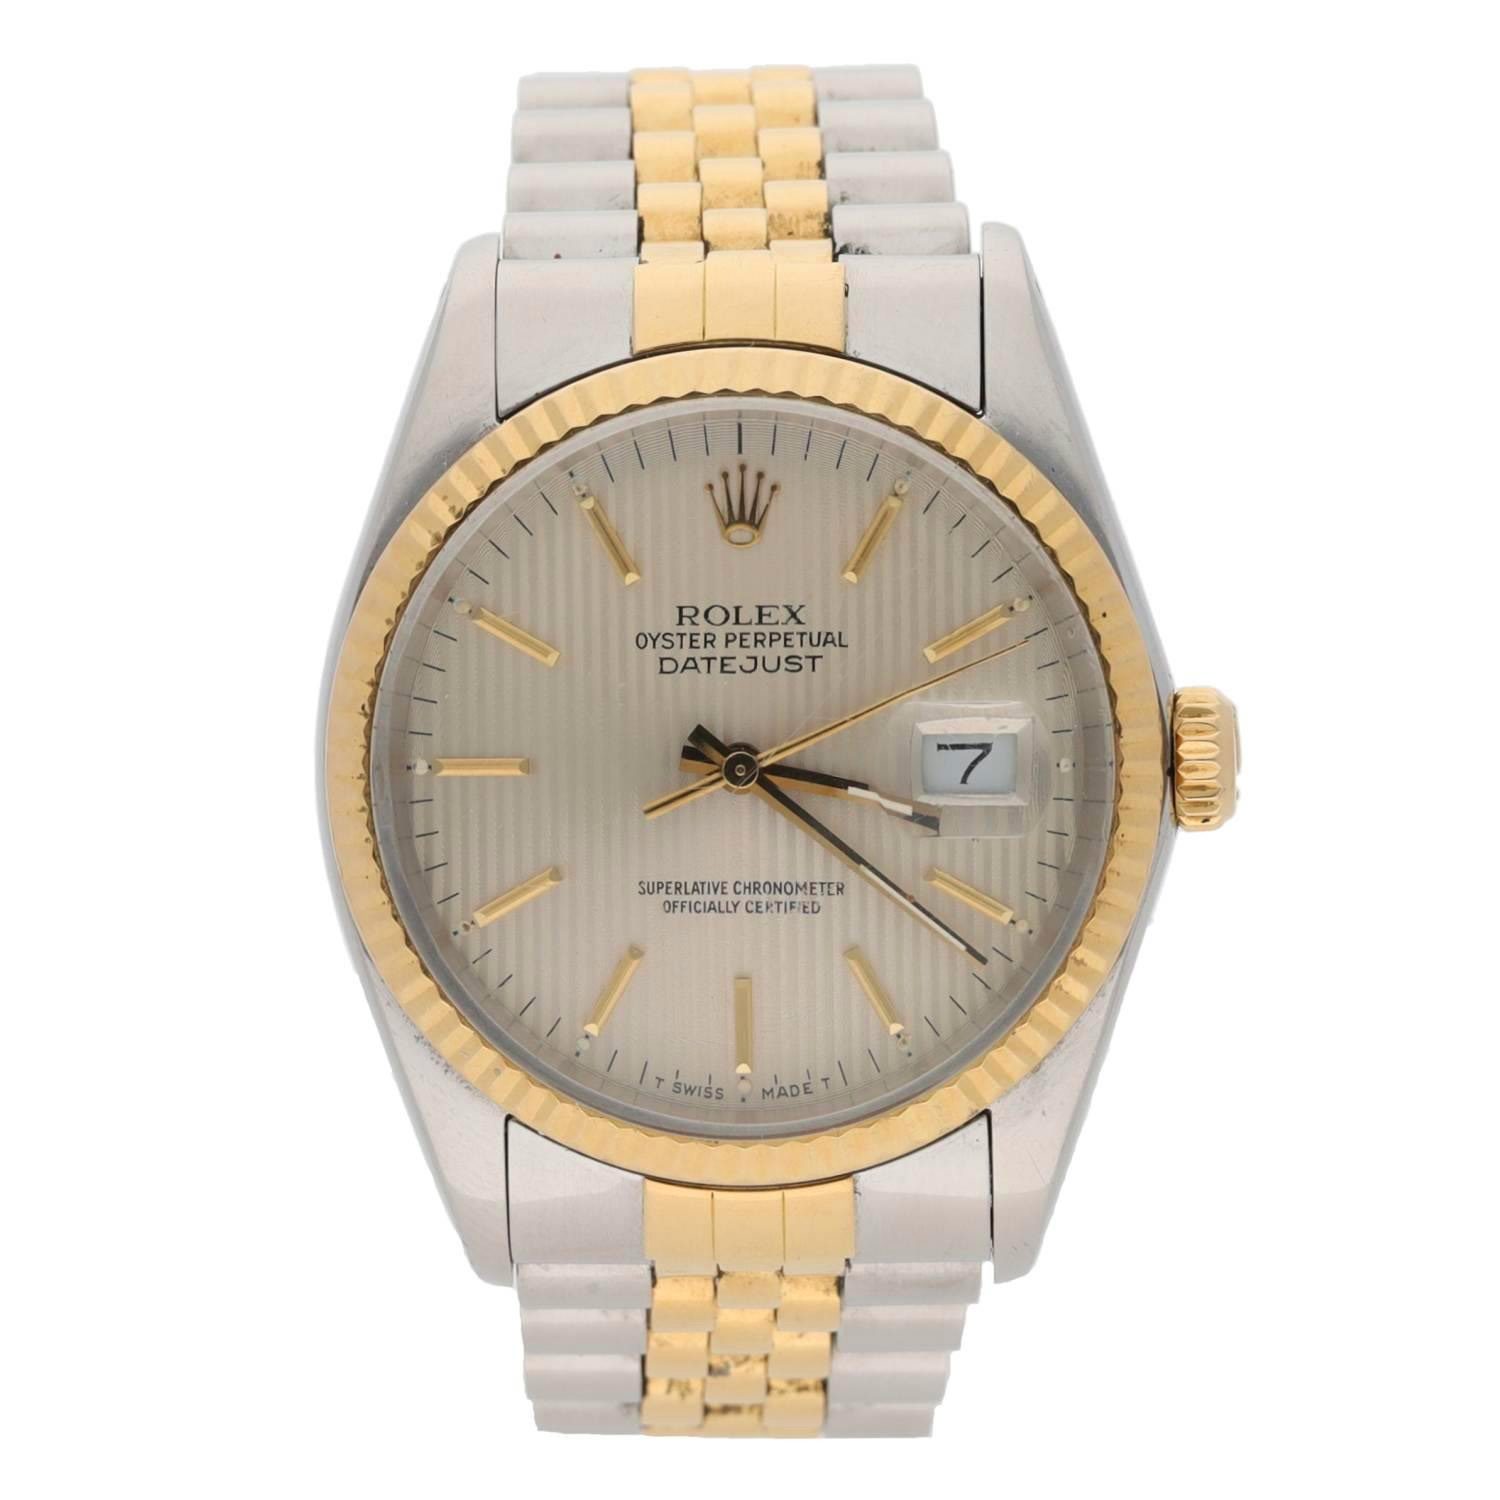 Rolex Oyster Perpetual Datejust gold and stainless steel gentleman's wristwatch, reference no. - Image 2 of 7